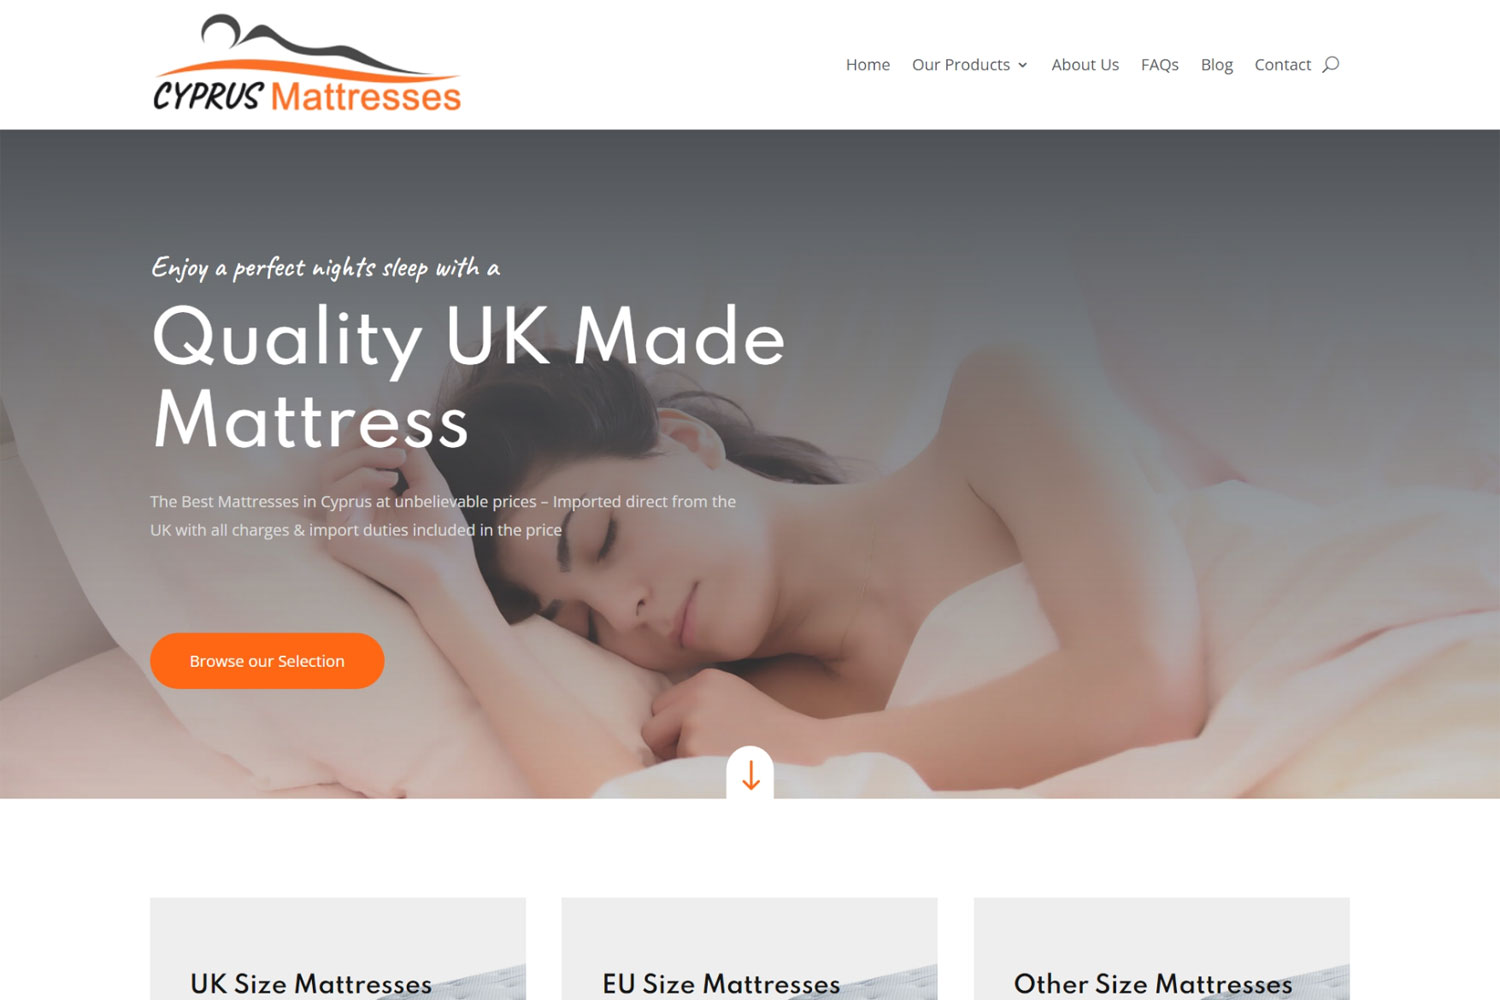 Cyprus Mattresses New Website Launched